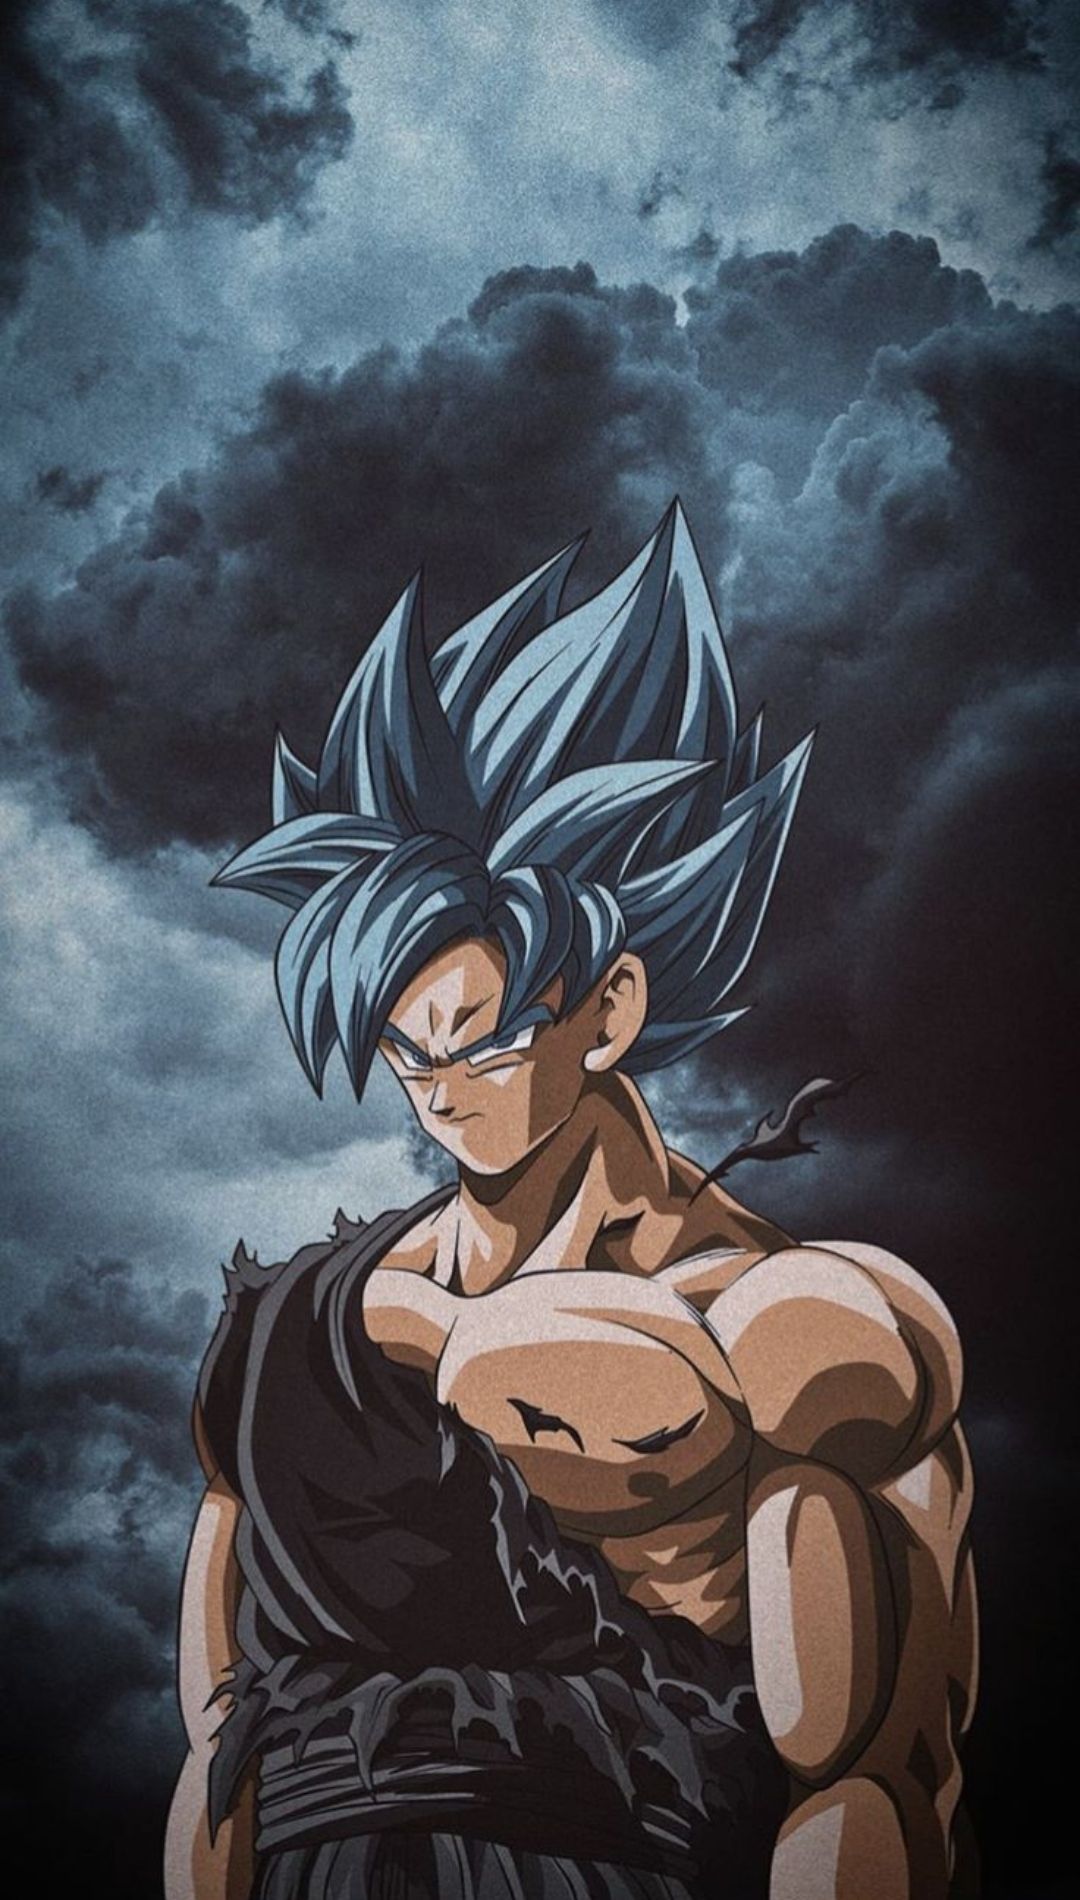 Goku Black Wallpaper for iPhone with high-resolution 1080x1920 pixel. You can use this wallpaper for your iPhone 5, 6, 7, 8, X, XS, XR backgrounds, Mobile Screensaver, or iPad Lock Screen - Goku